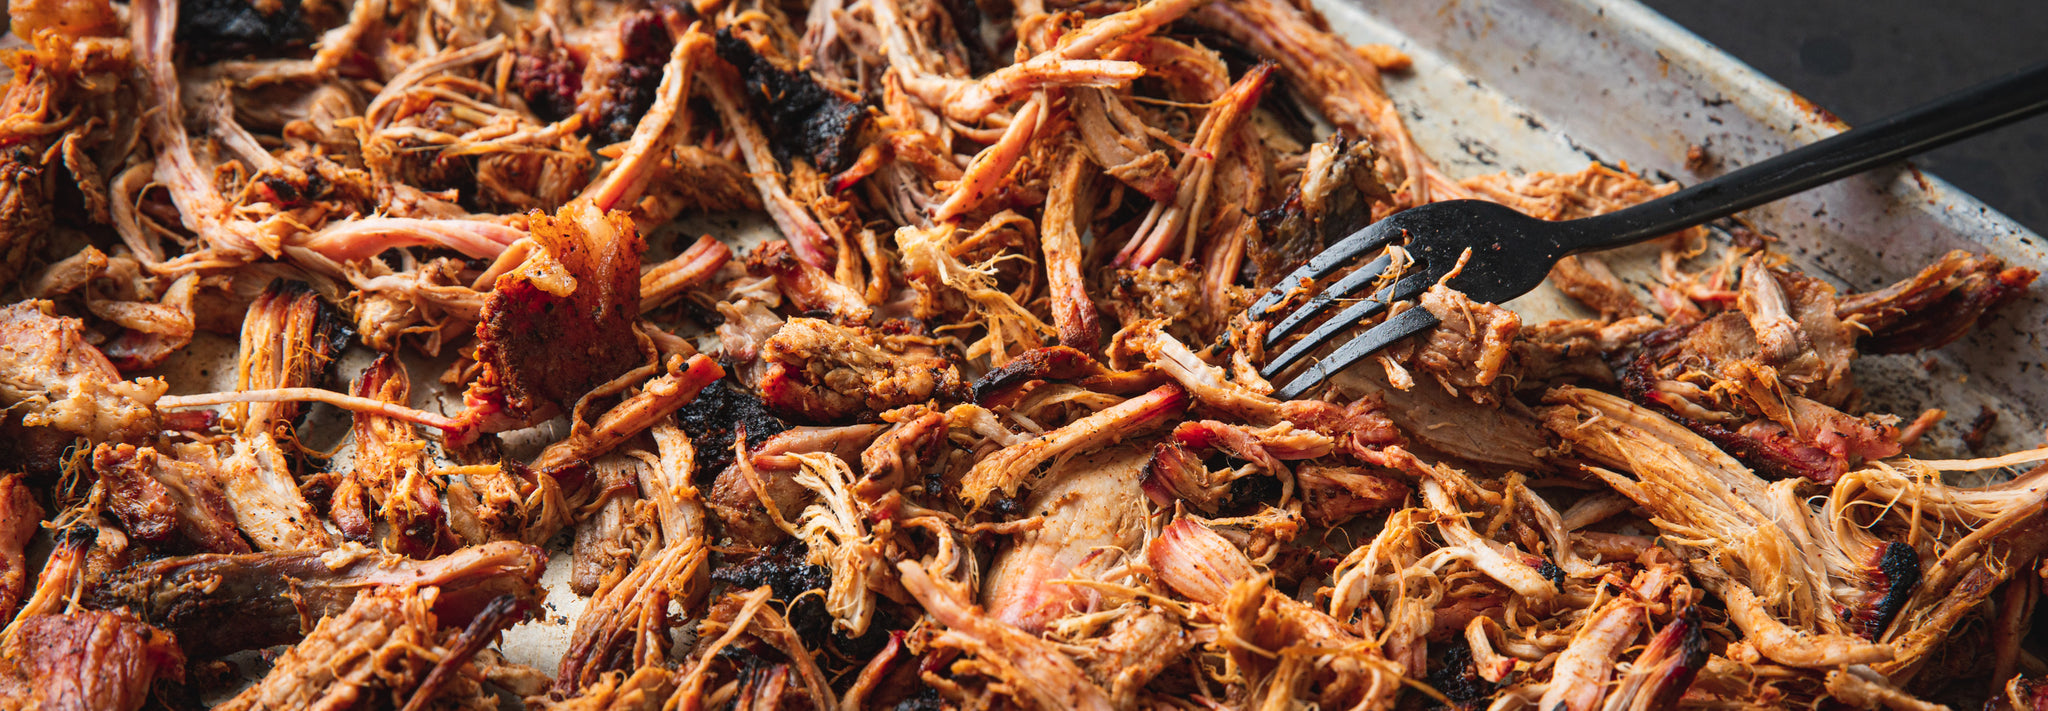 Hickory Smoked ‘Pulled’ Pork Butt